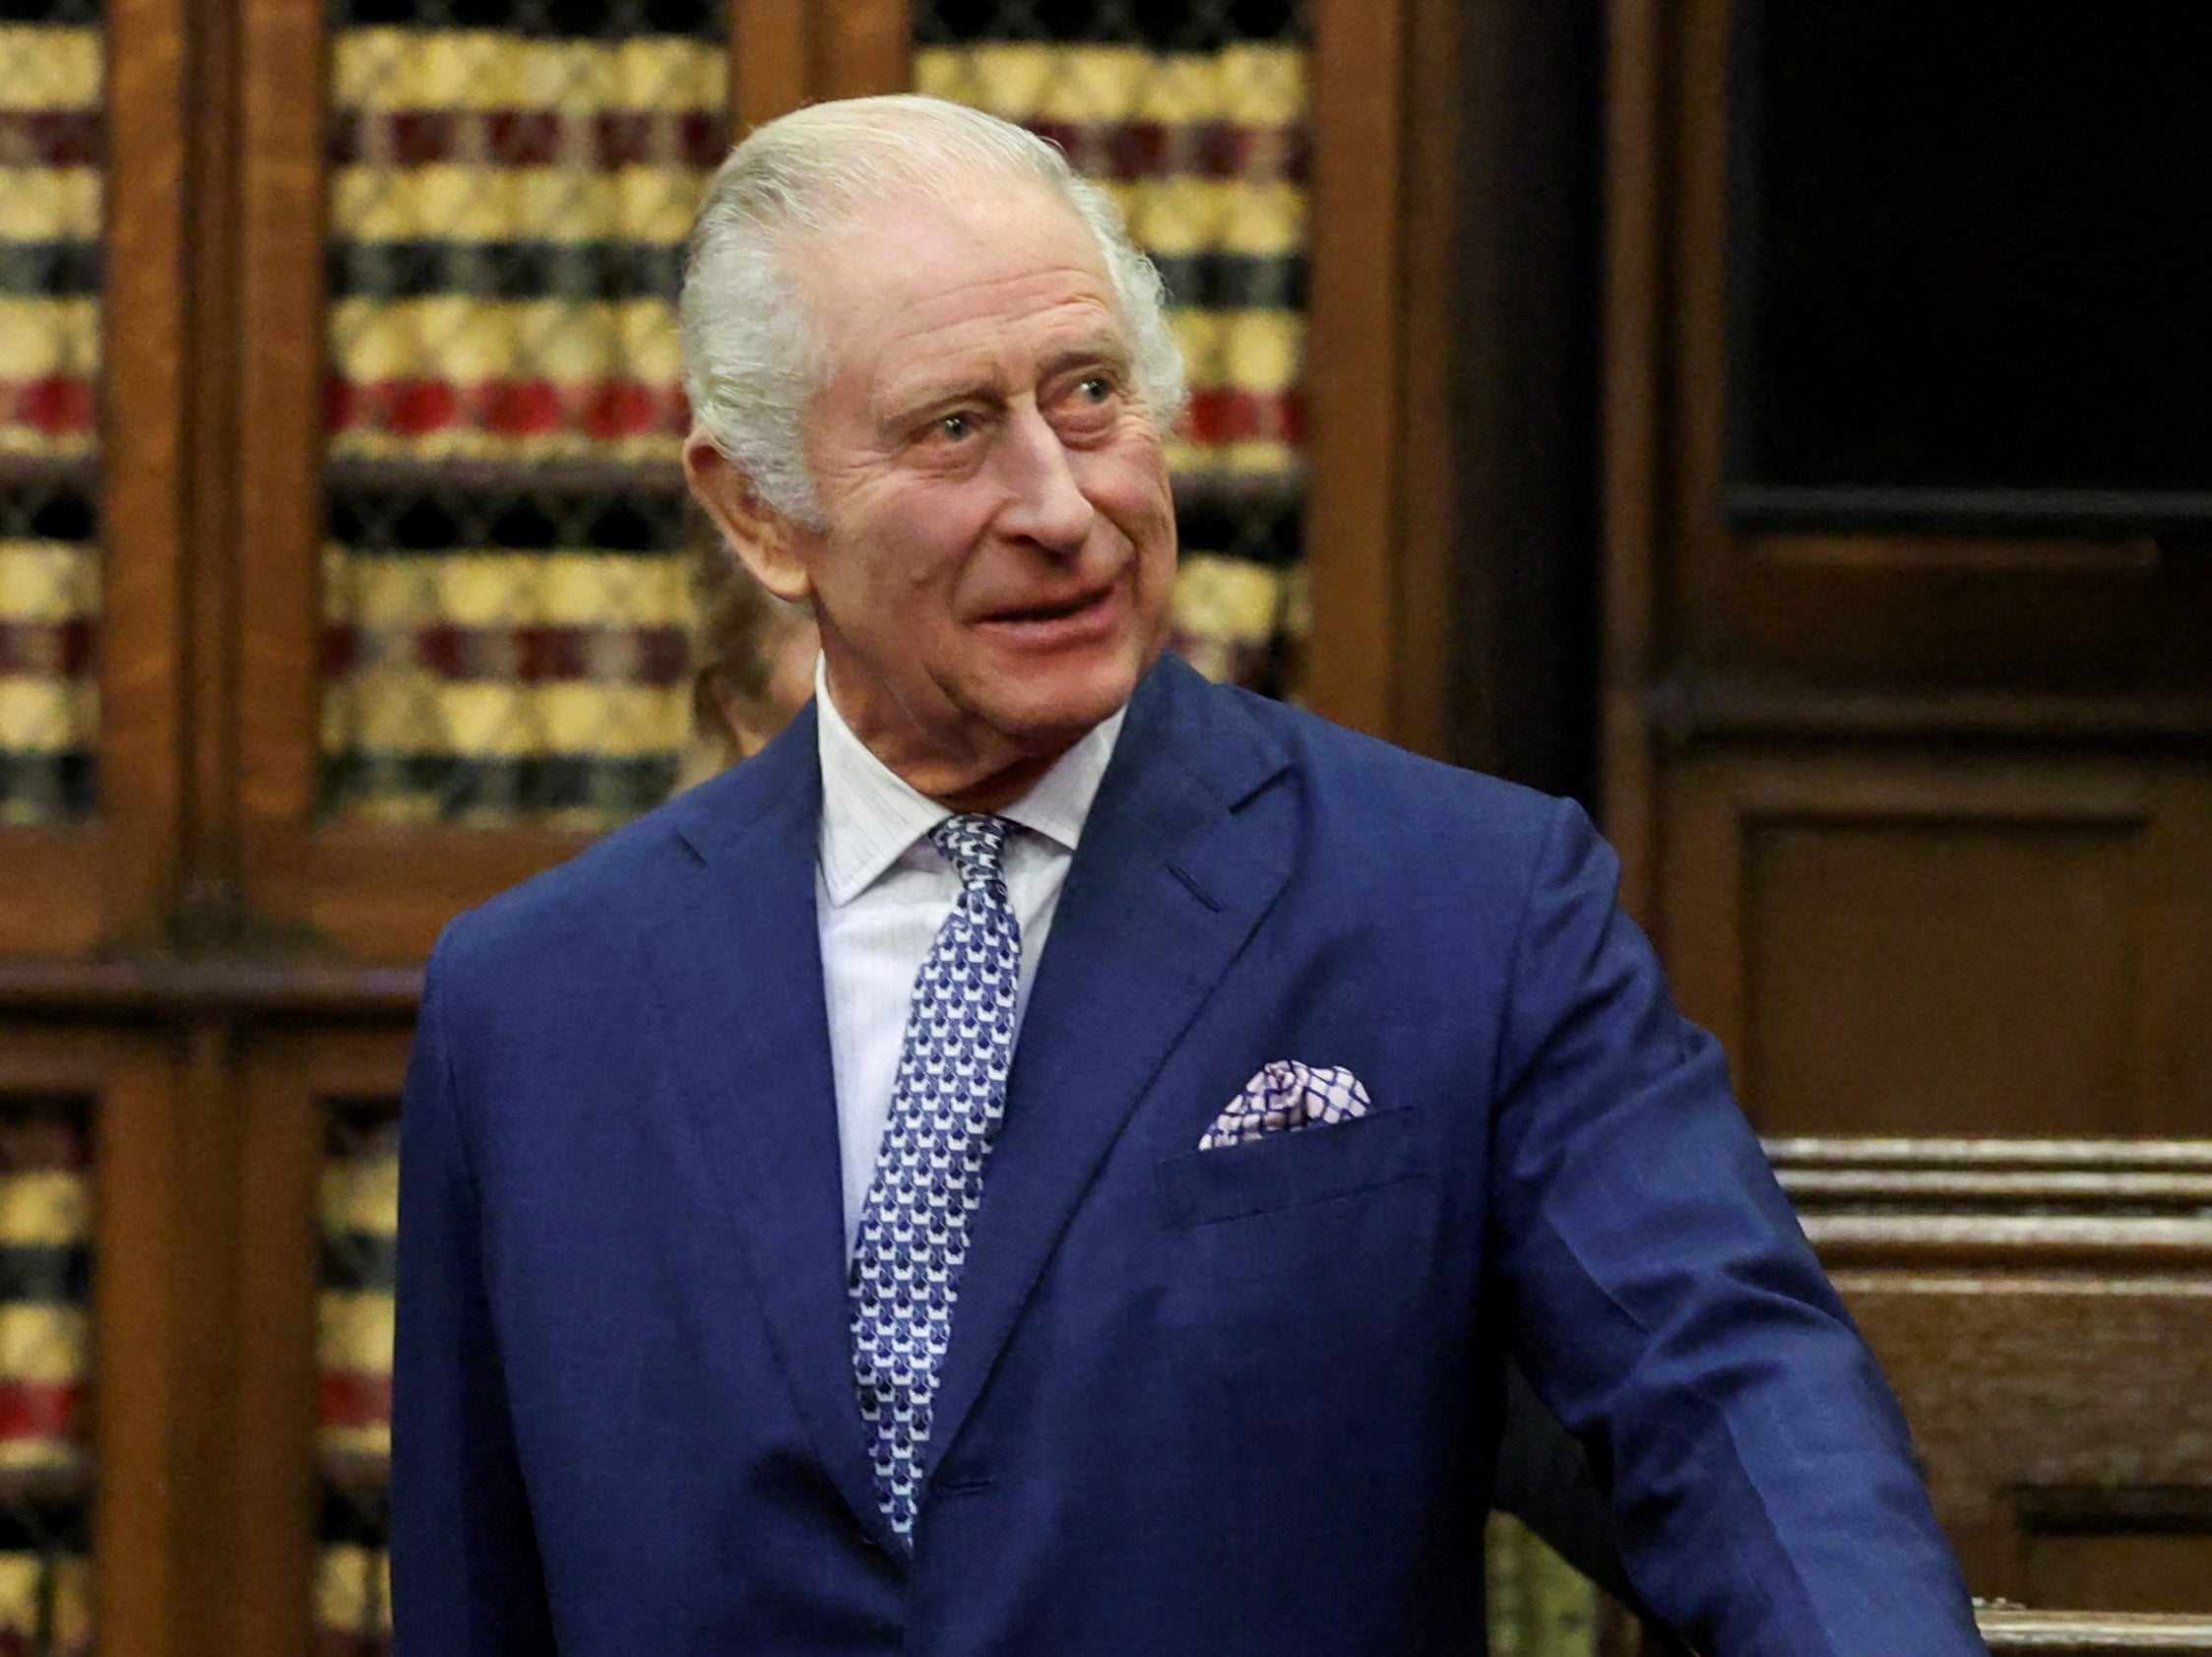 The king is being treated at the same hospital where the Princess of Wales is recovering